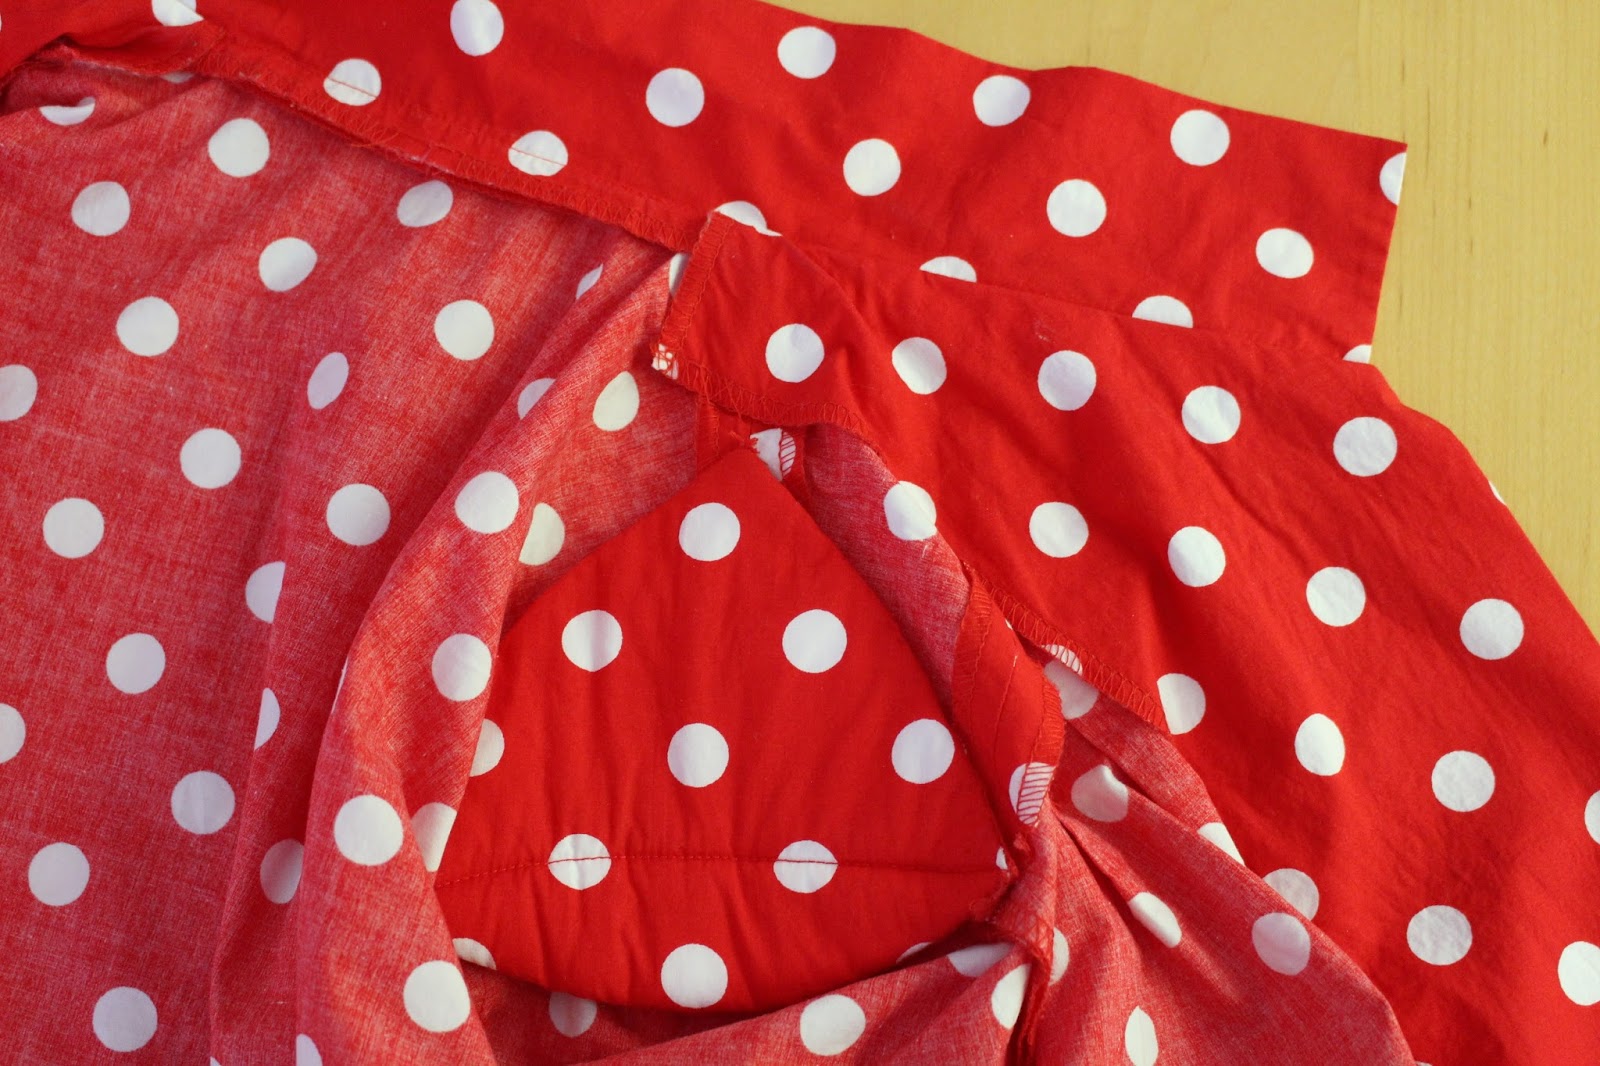 Handmade By Heather B: Polka Dots are Forever